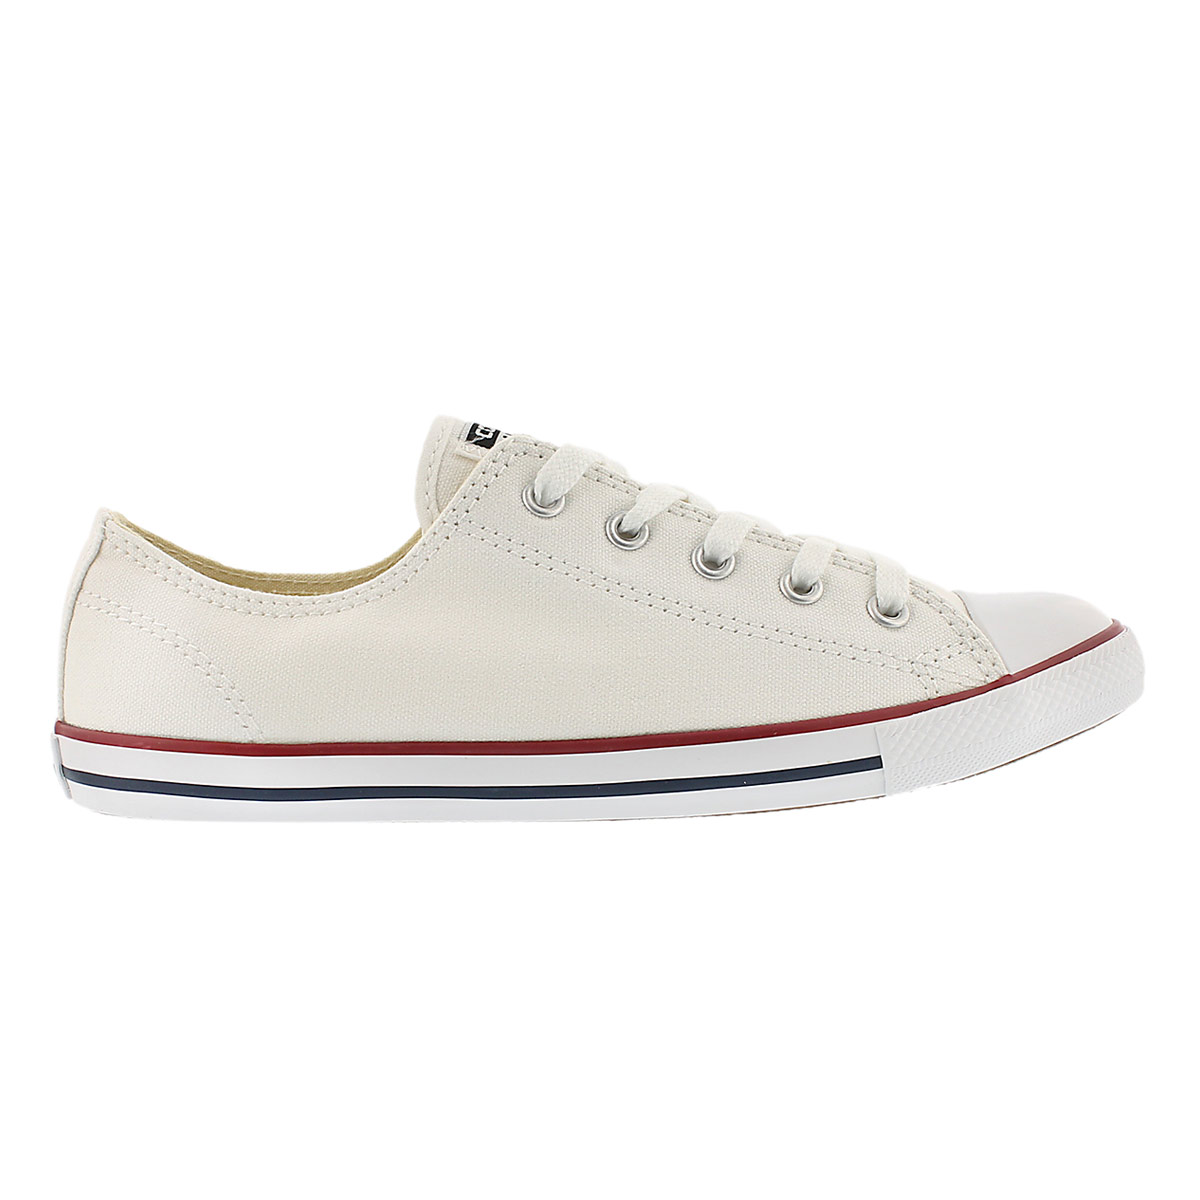 converse dainty true to size